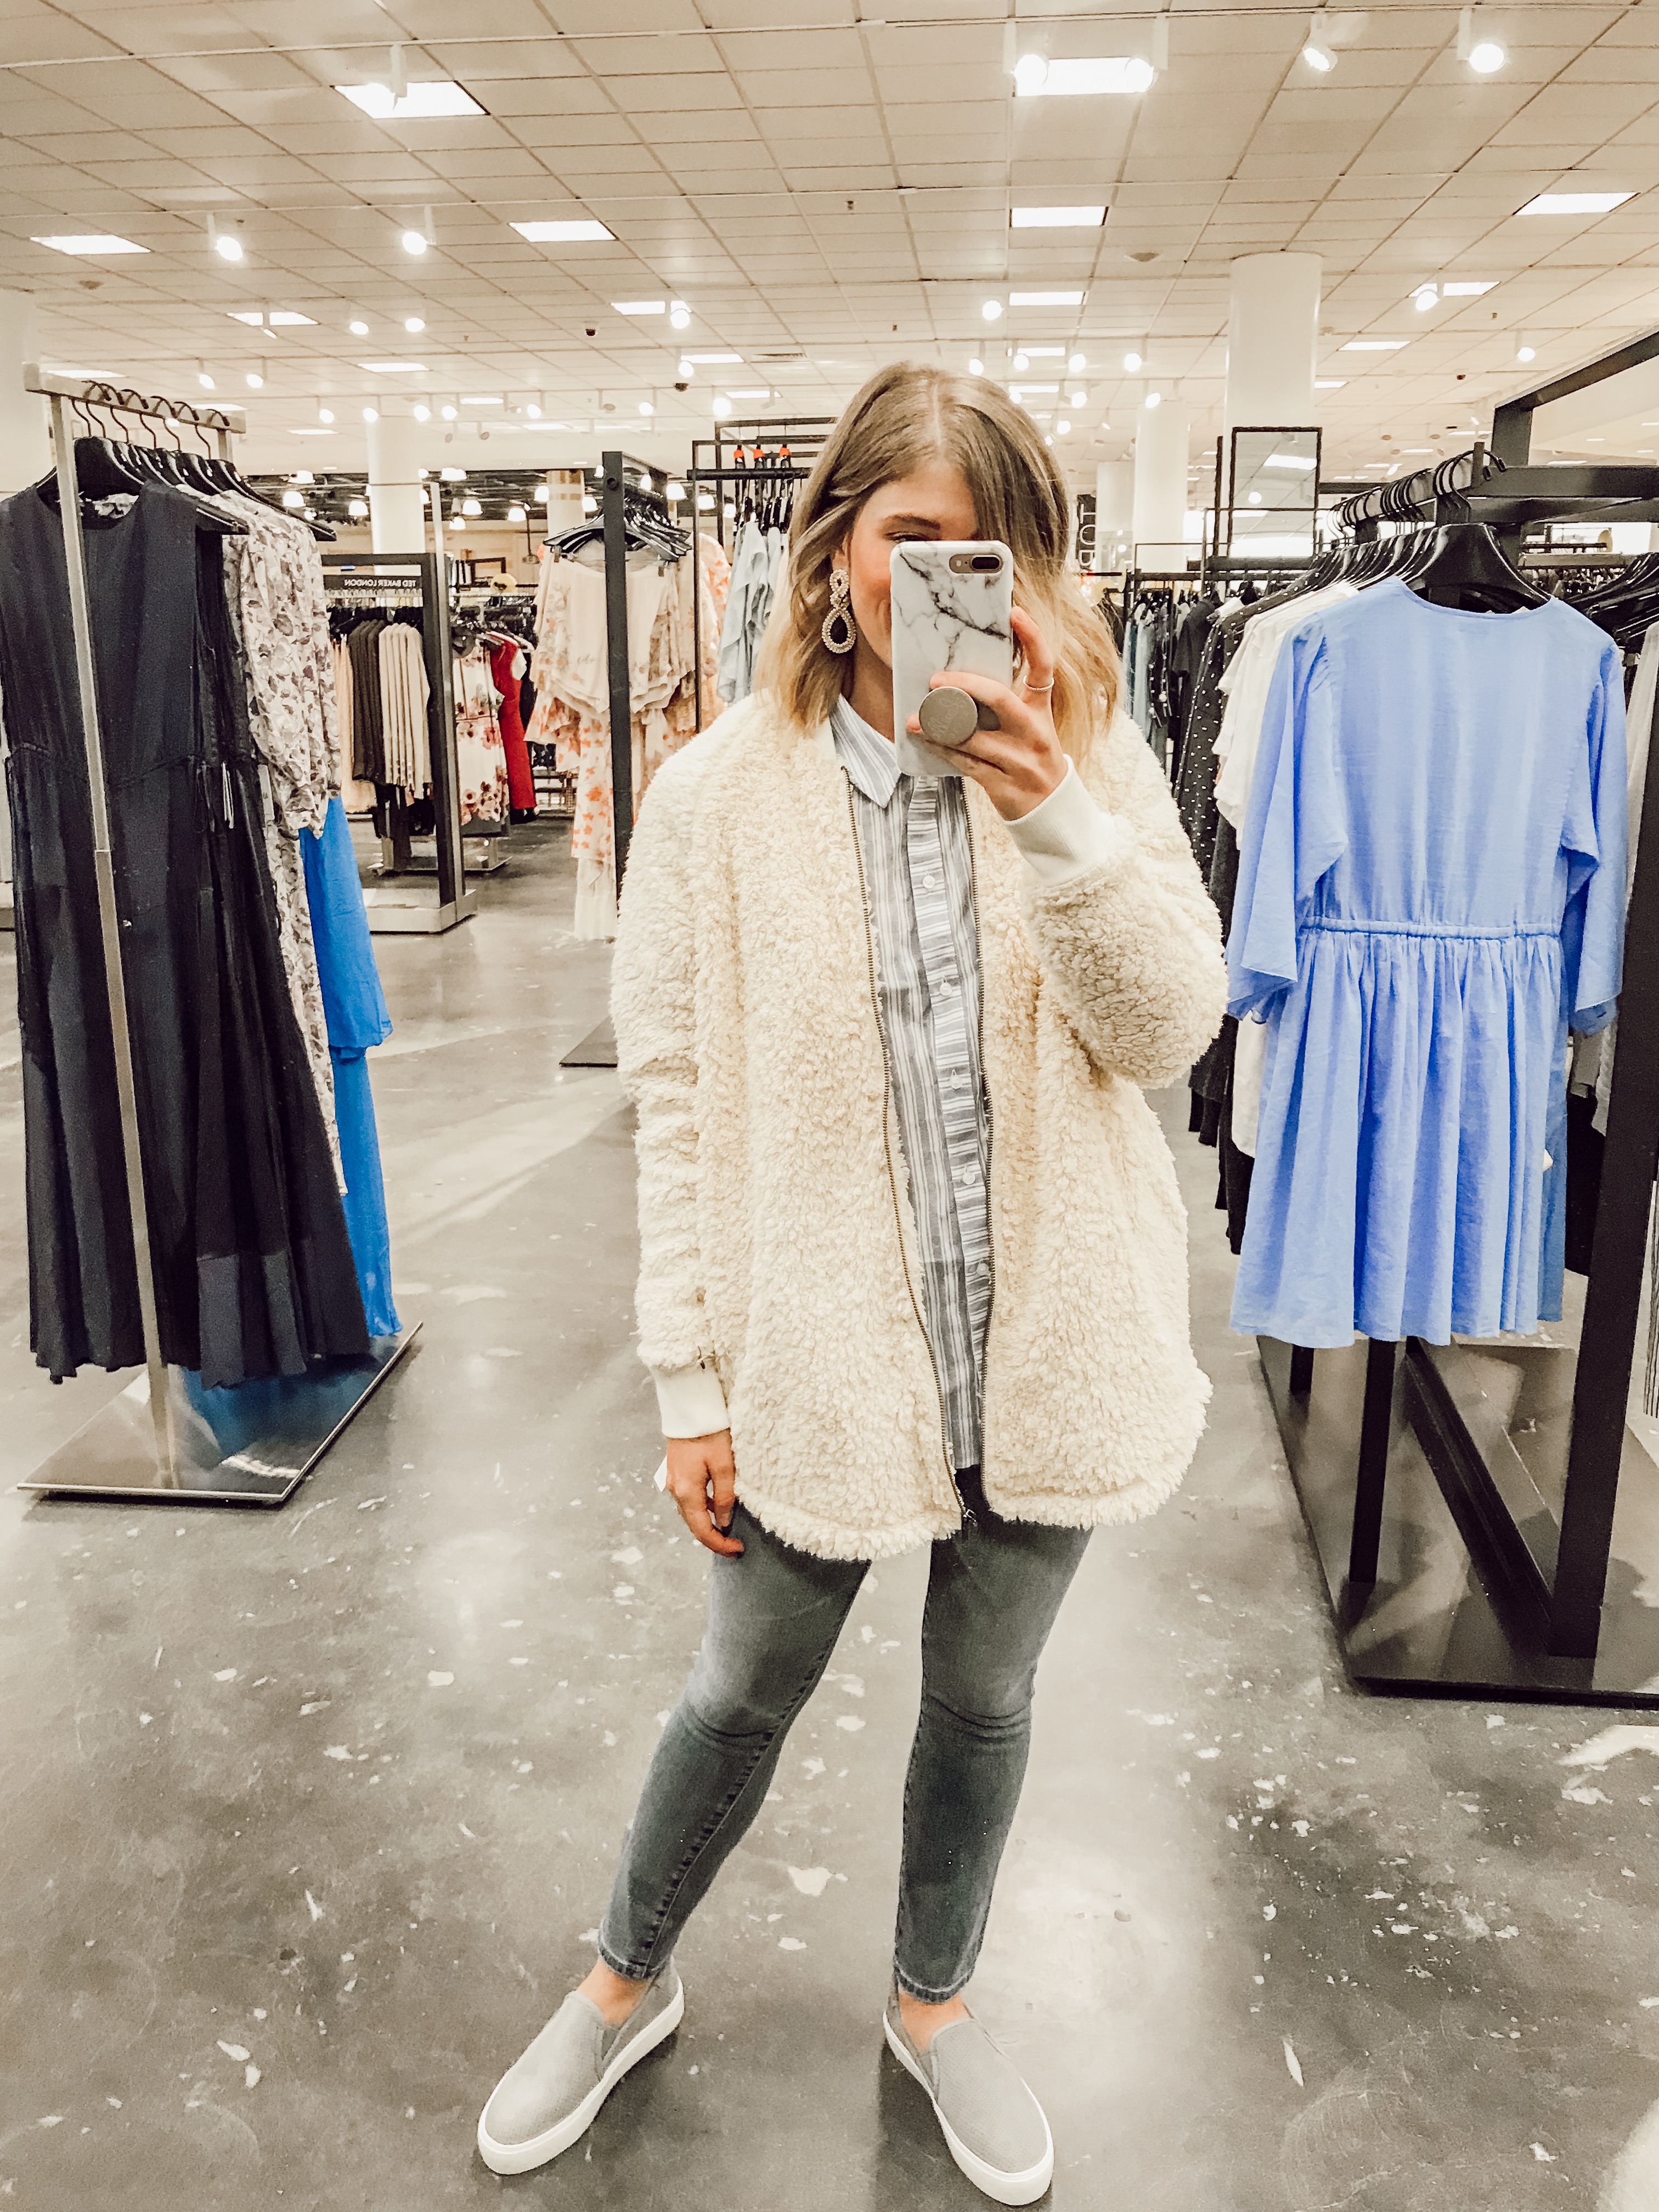 Caslon Long Faux Fur Jacket | 2019 Nordstrom Anniversary Fitting Room Session featured on Louella Reese Life & Style Blog